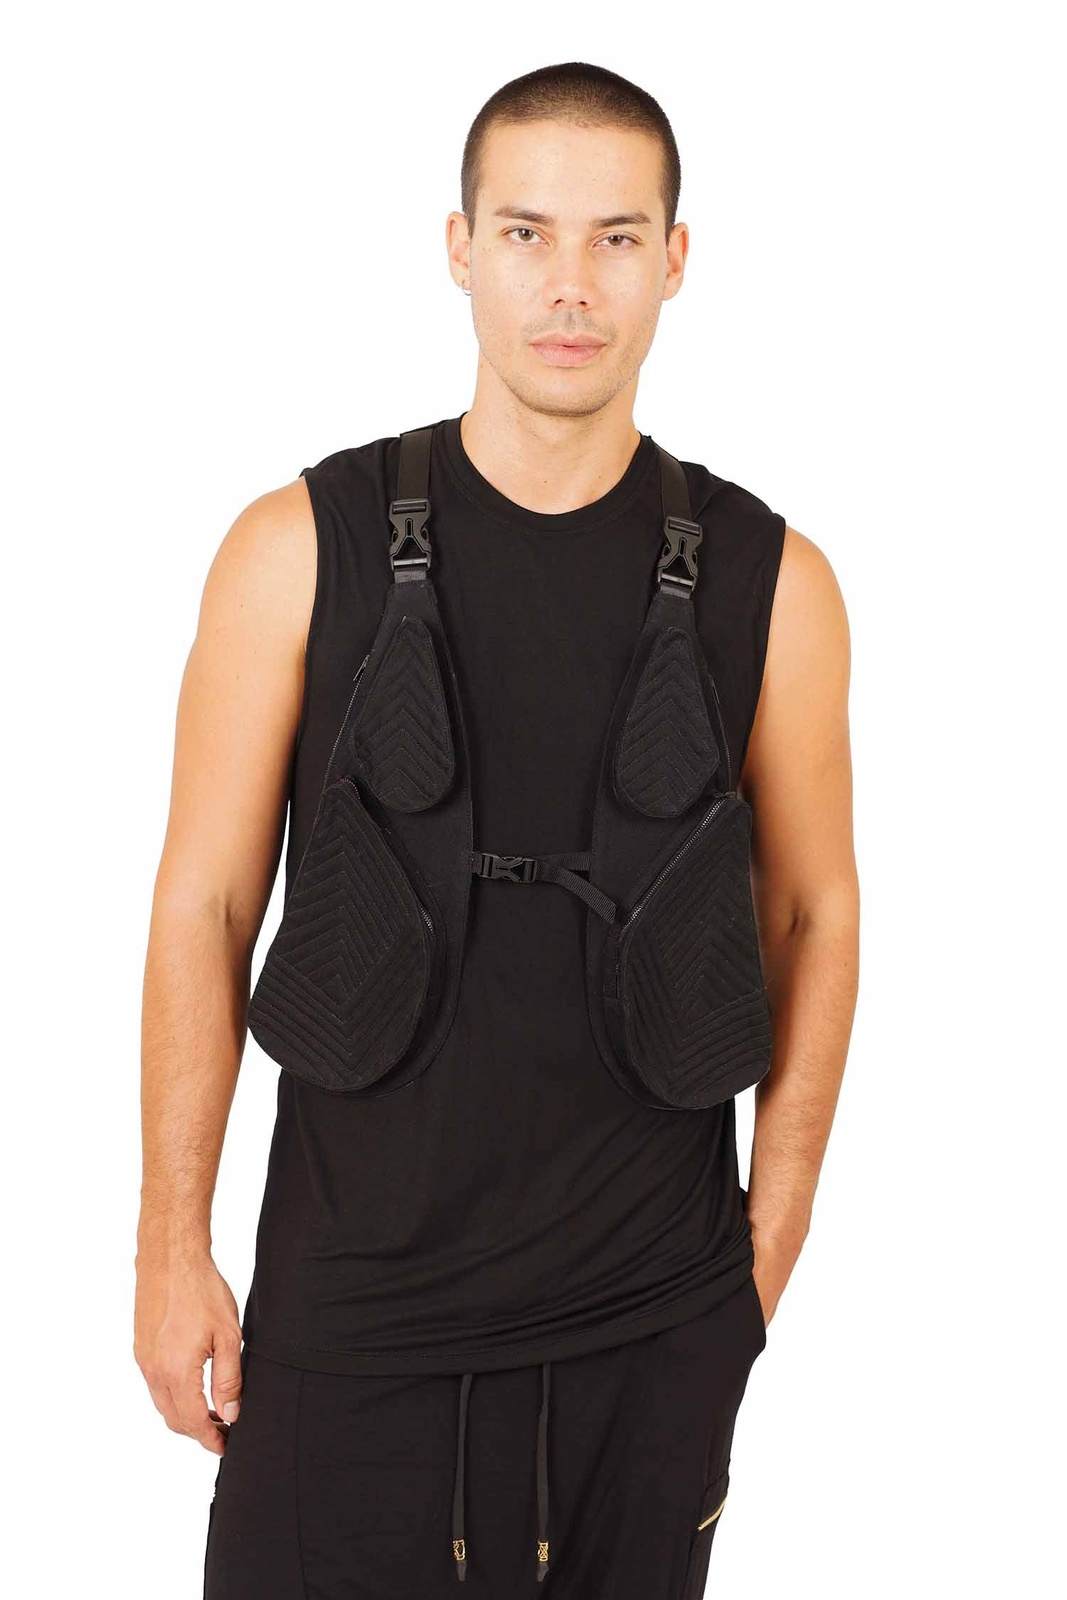 man wearing a black tactical vest from Love Khaos.